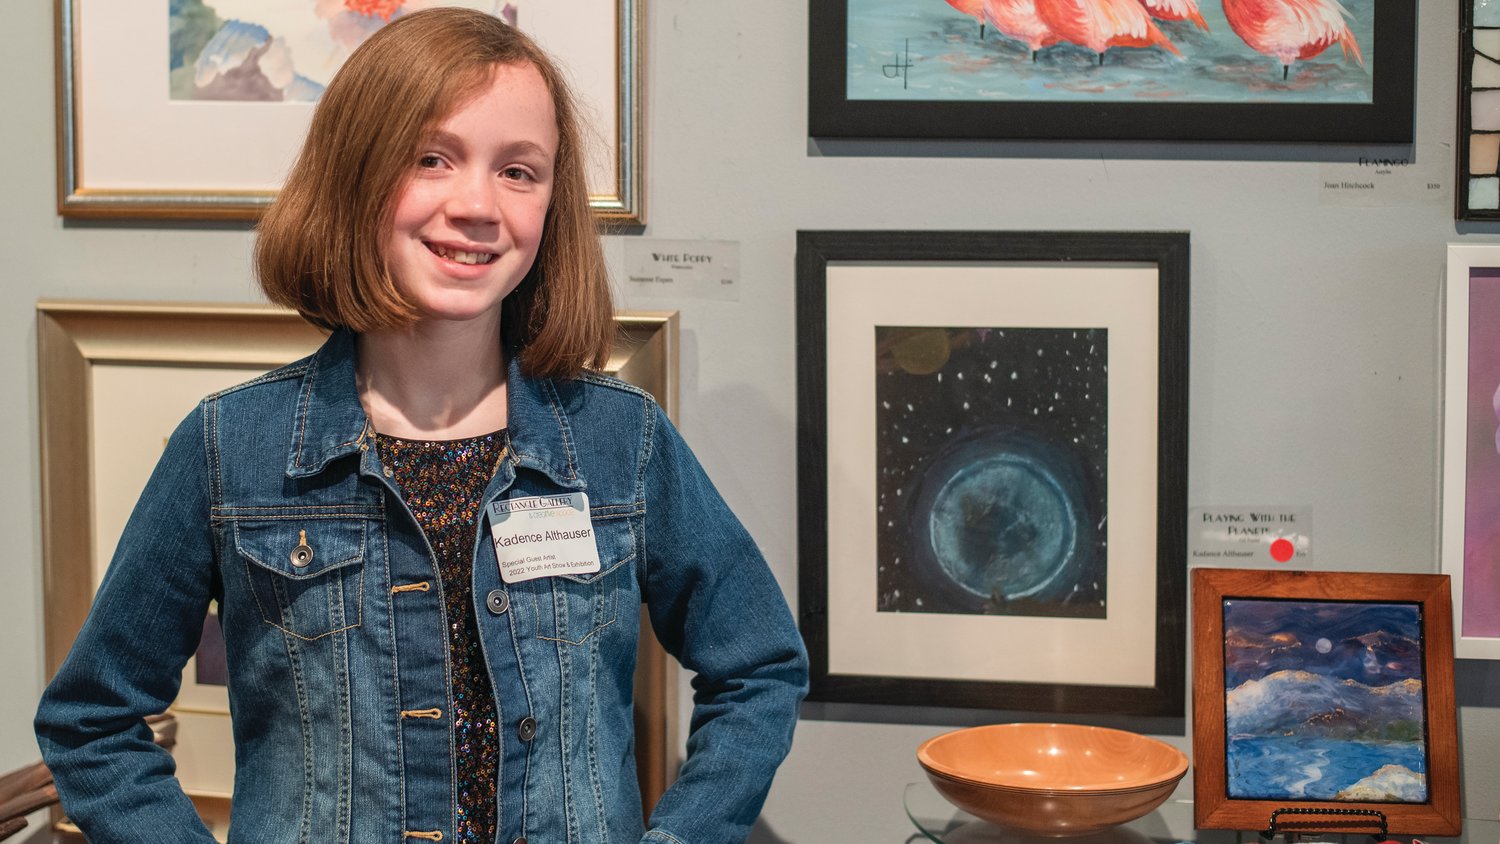 Kadence Althauser smiles and poses for a photo in front of her art titled, “Playing with the Planets,” at the Rectangle Gallery & Creative Space in Centralia.